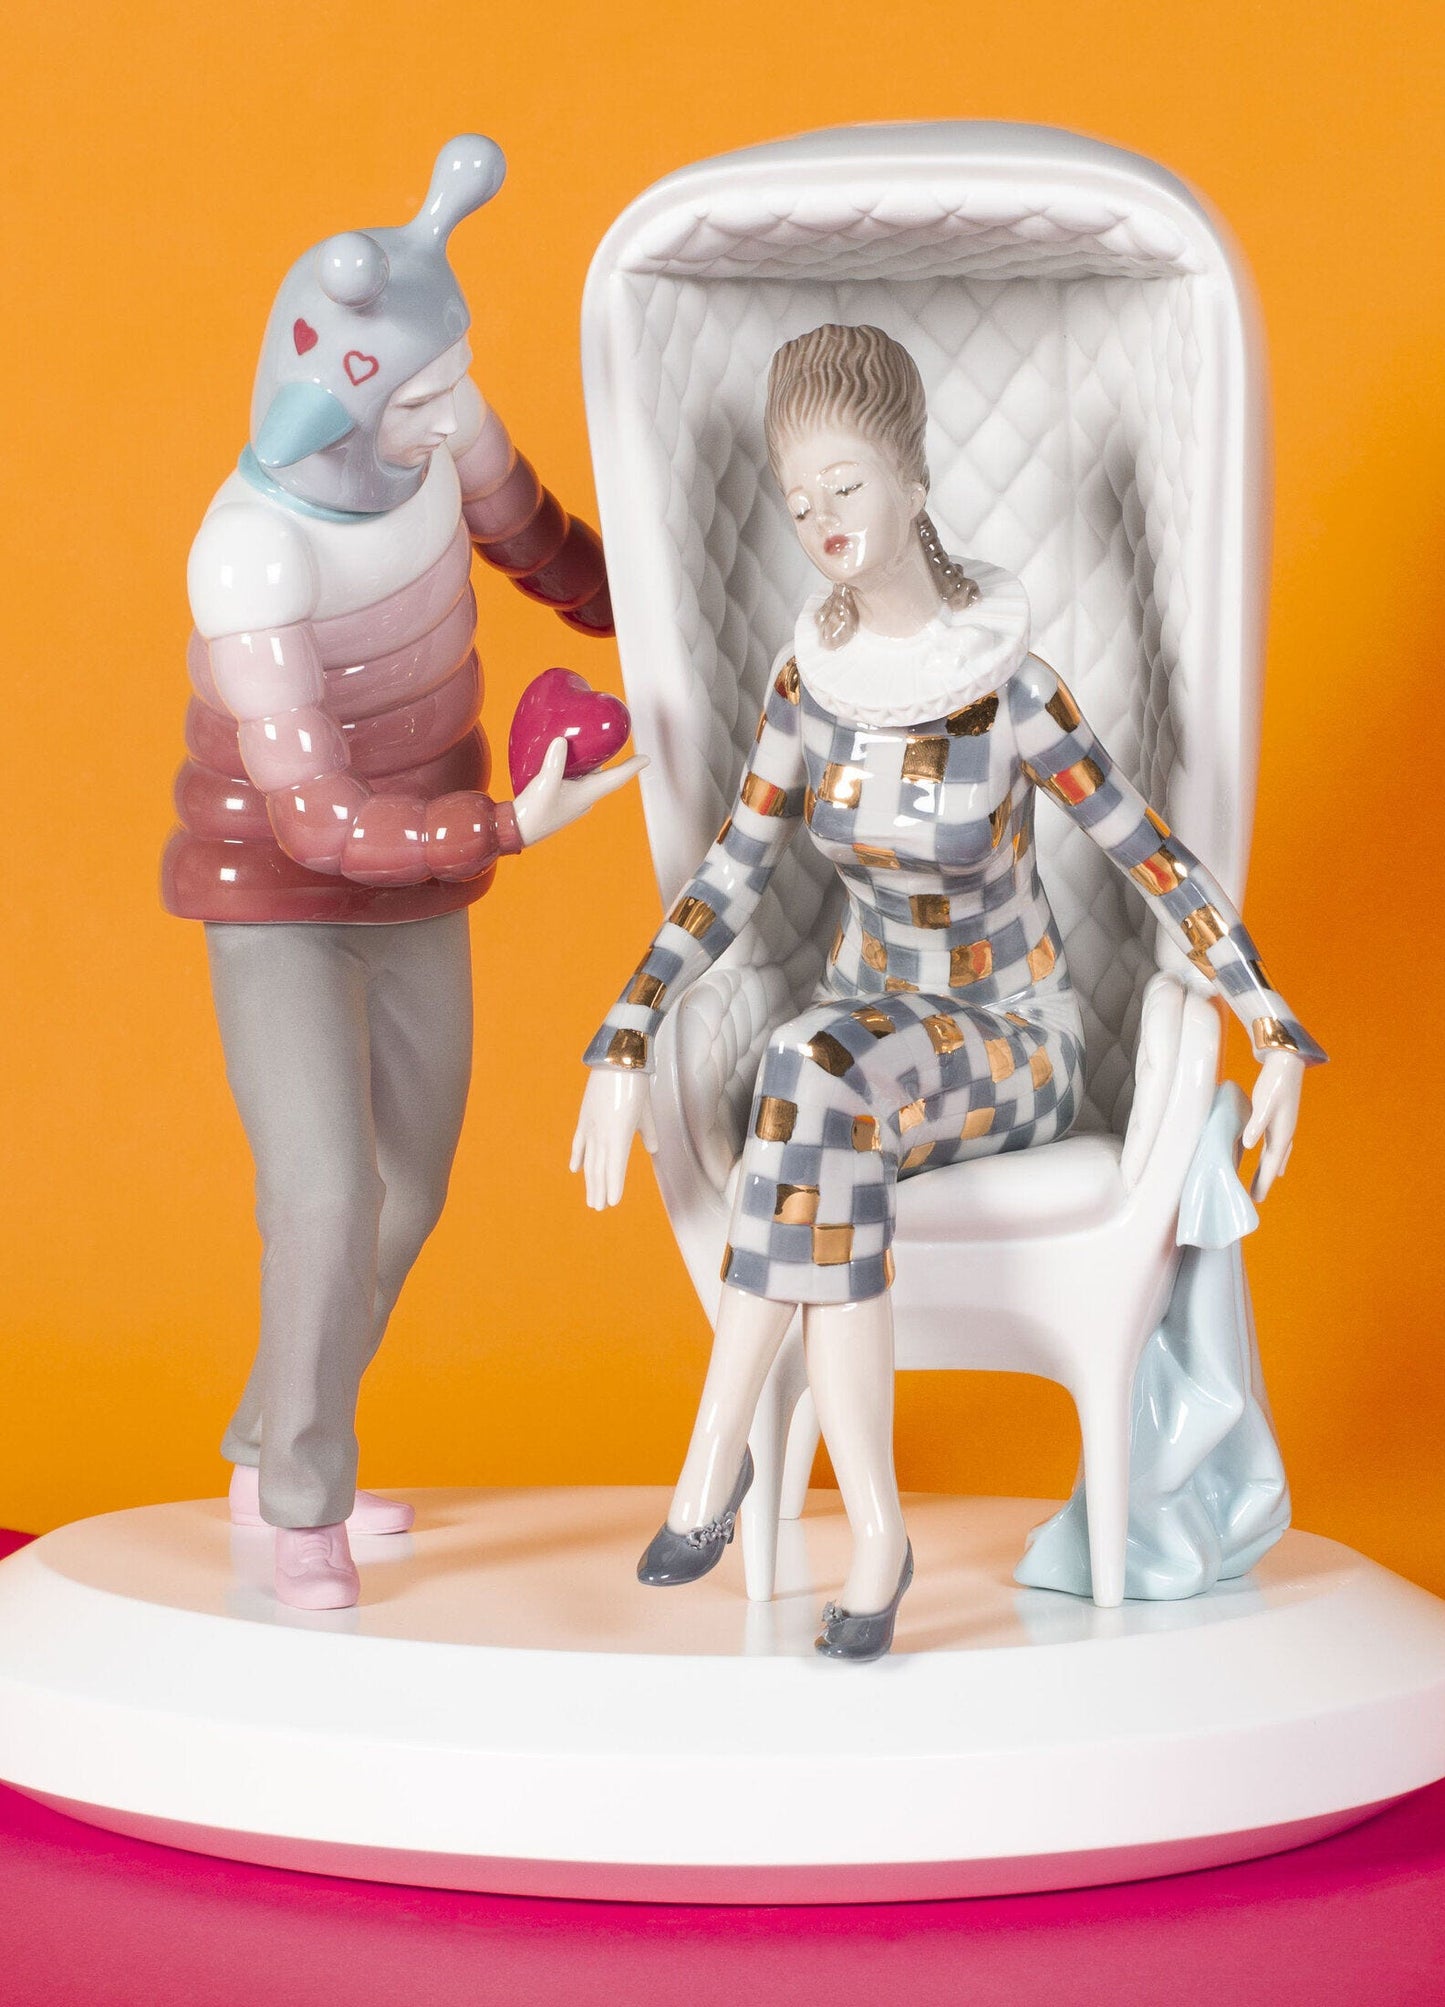 The Love Explosion Couple Figurine By Jaime Hayon